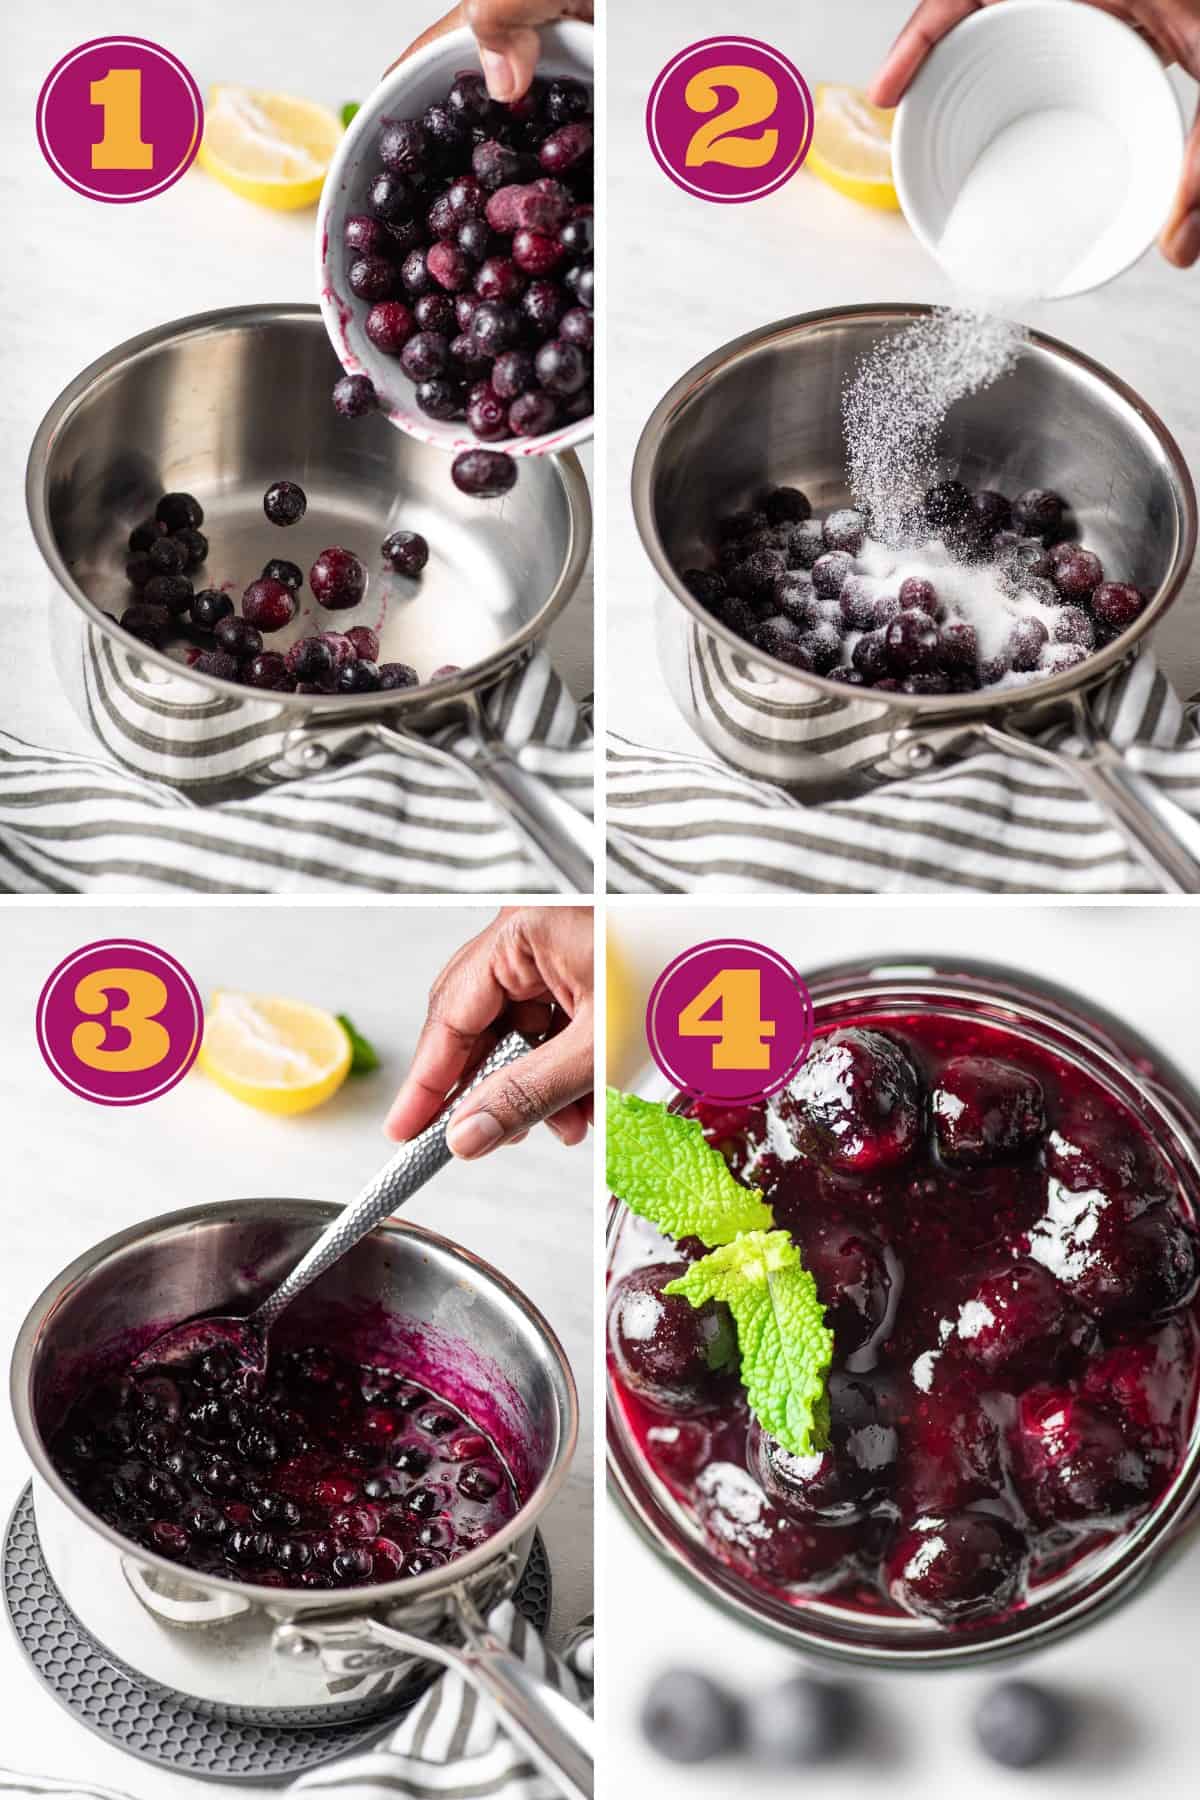 photo collage showing how to make sugar free blueberry sauce by adding the ingredients to a pan, stirring, and adding the finished sauce to a glass jar